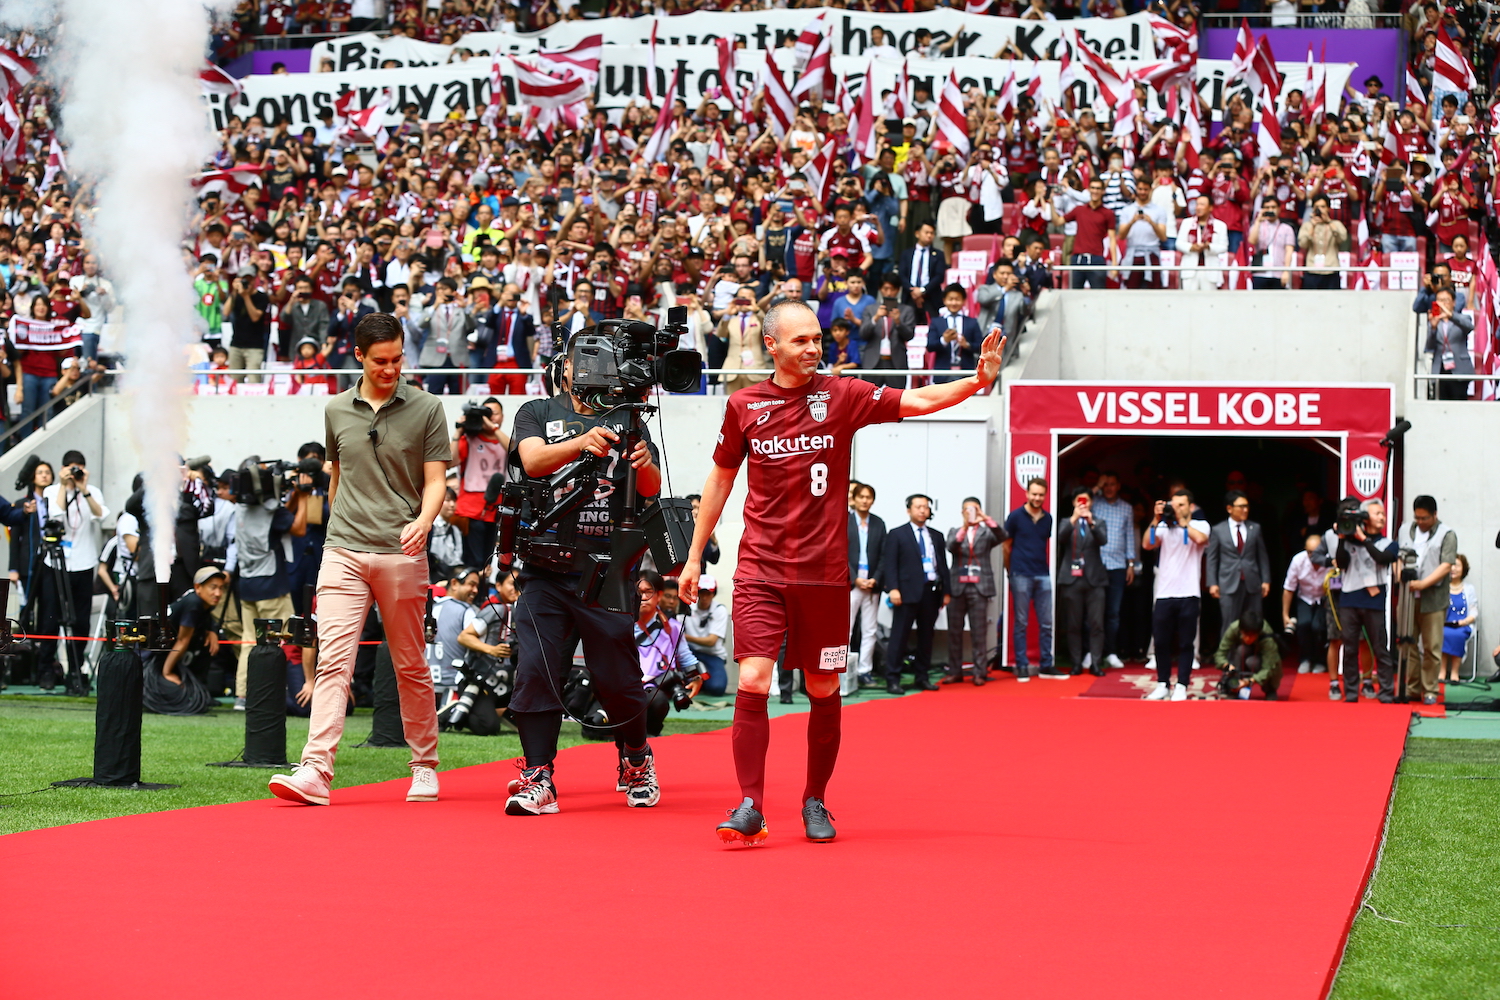 Thousands show up to Vissel Kobe fan event to welcome Iniesta ‘home’1500 x 1000